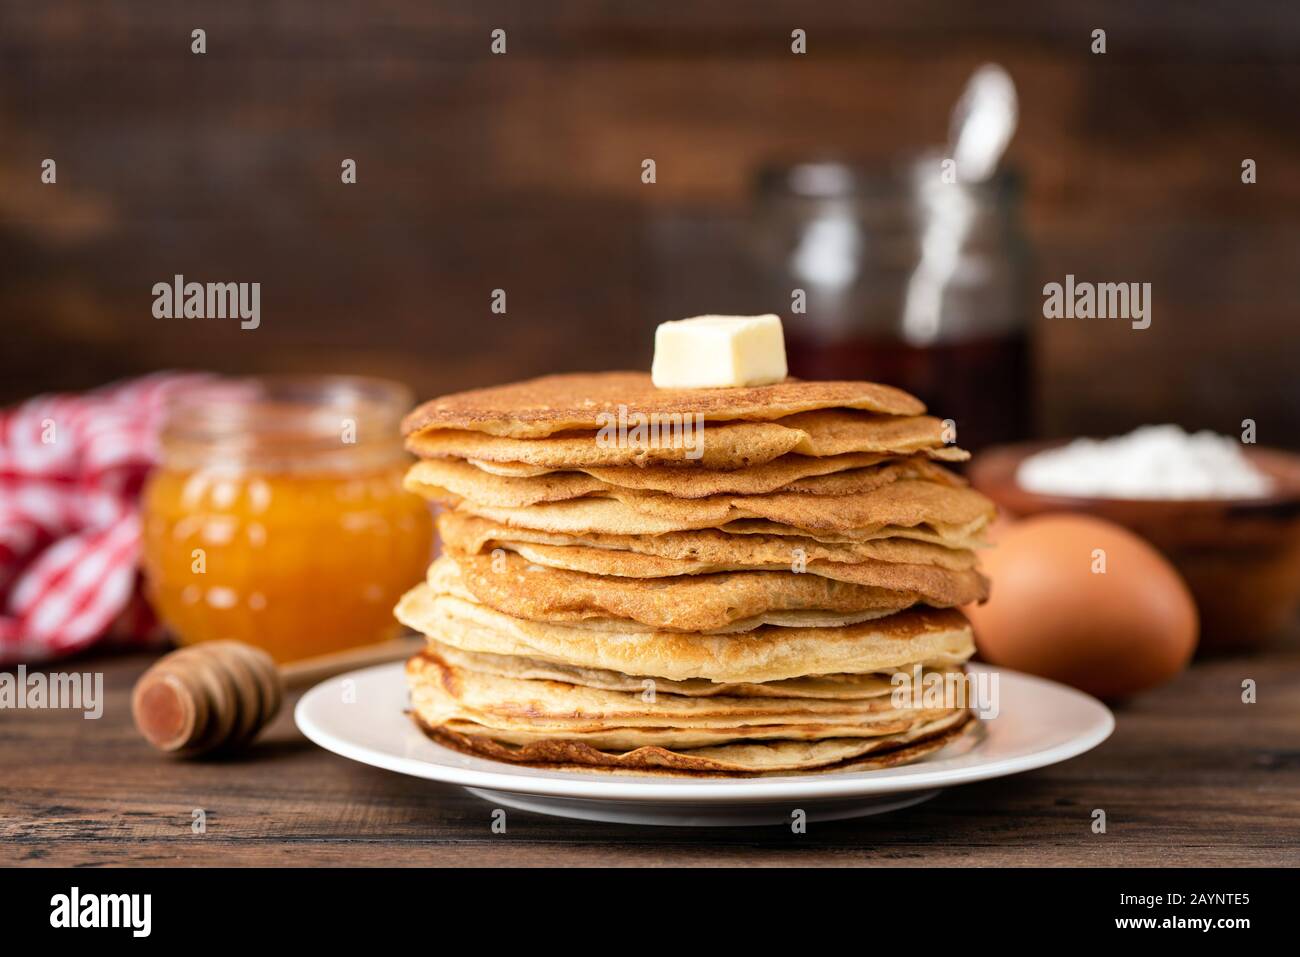 Stack Of Homemade Crepes, Blini, Thin Pancakes With Honey And Butter. Russian Maslenitsa Holiday Concept Stock Photo